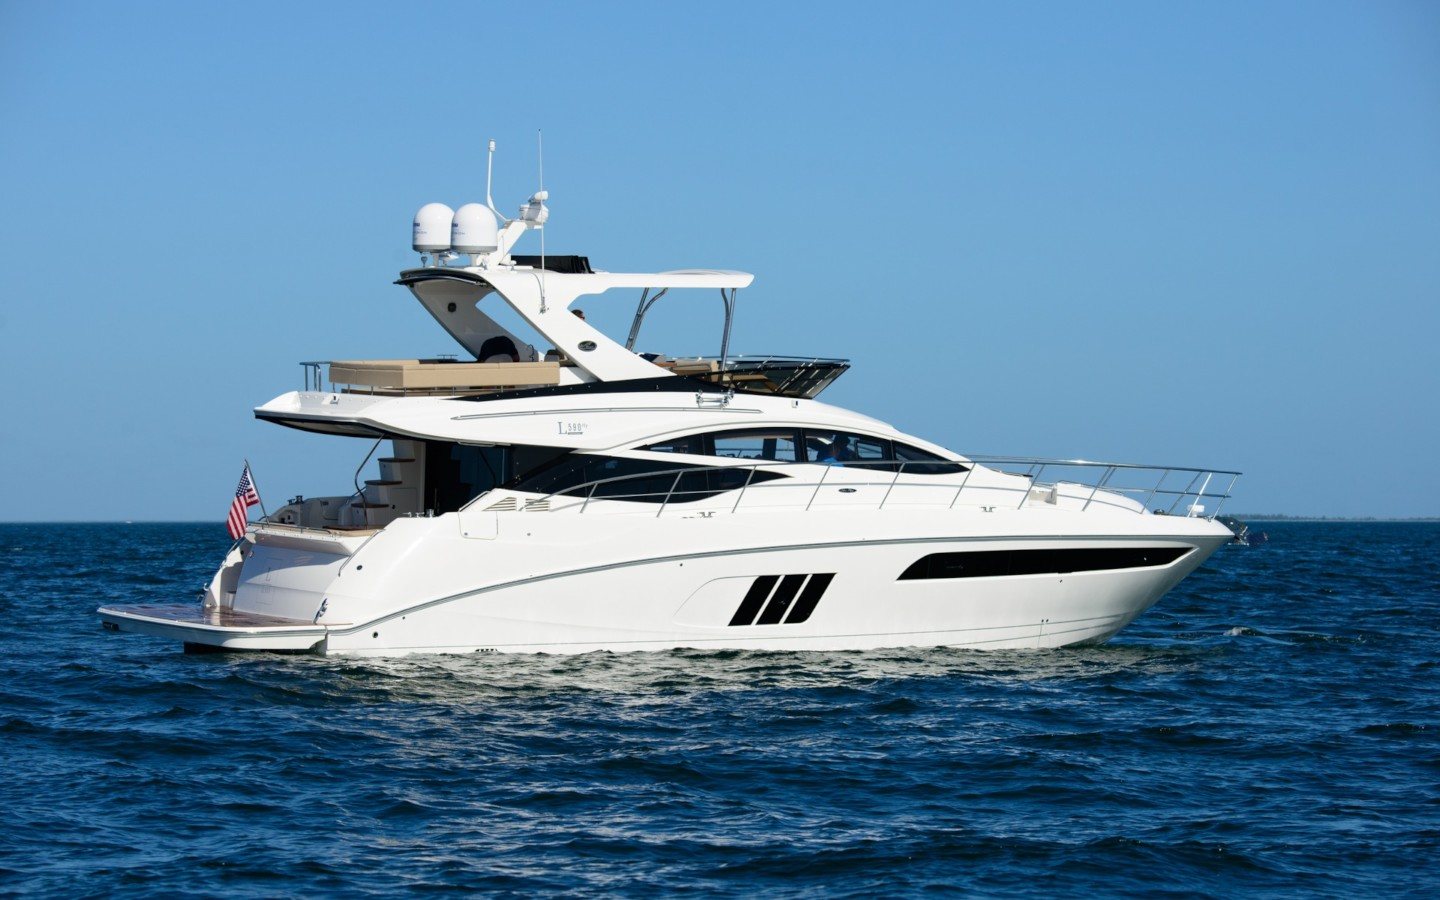 360 VR Virtual Tours of the Sea Ray L590 Fly